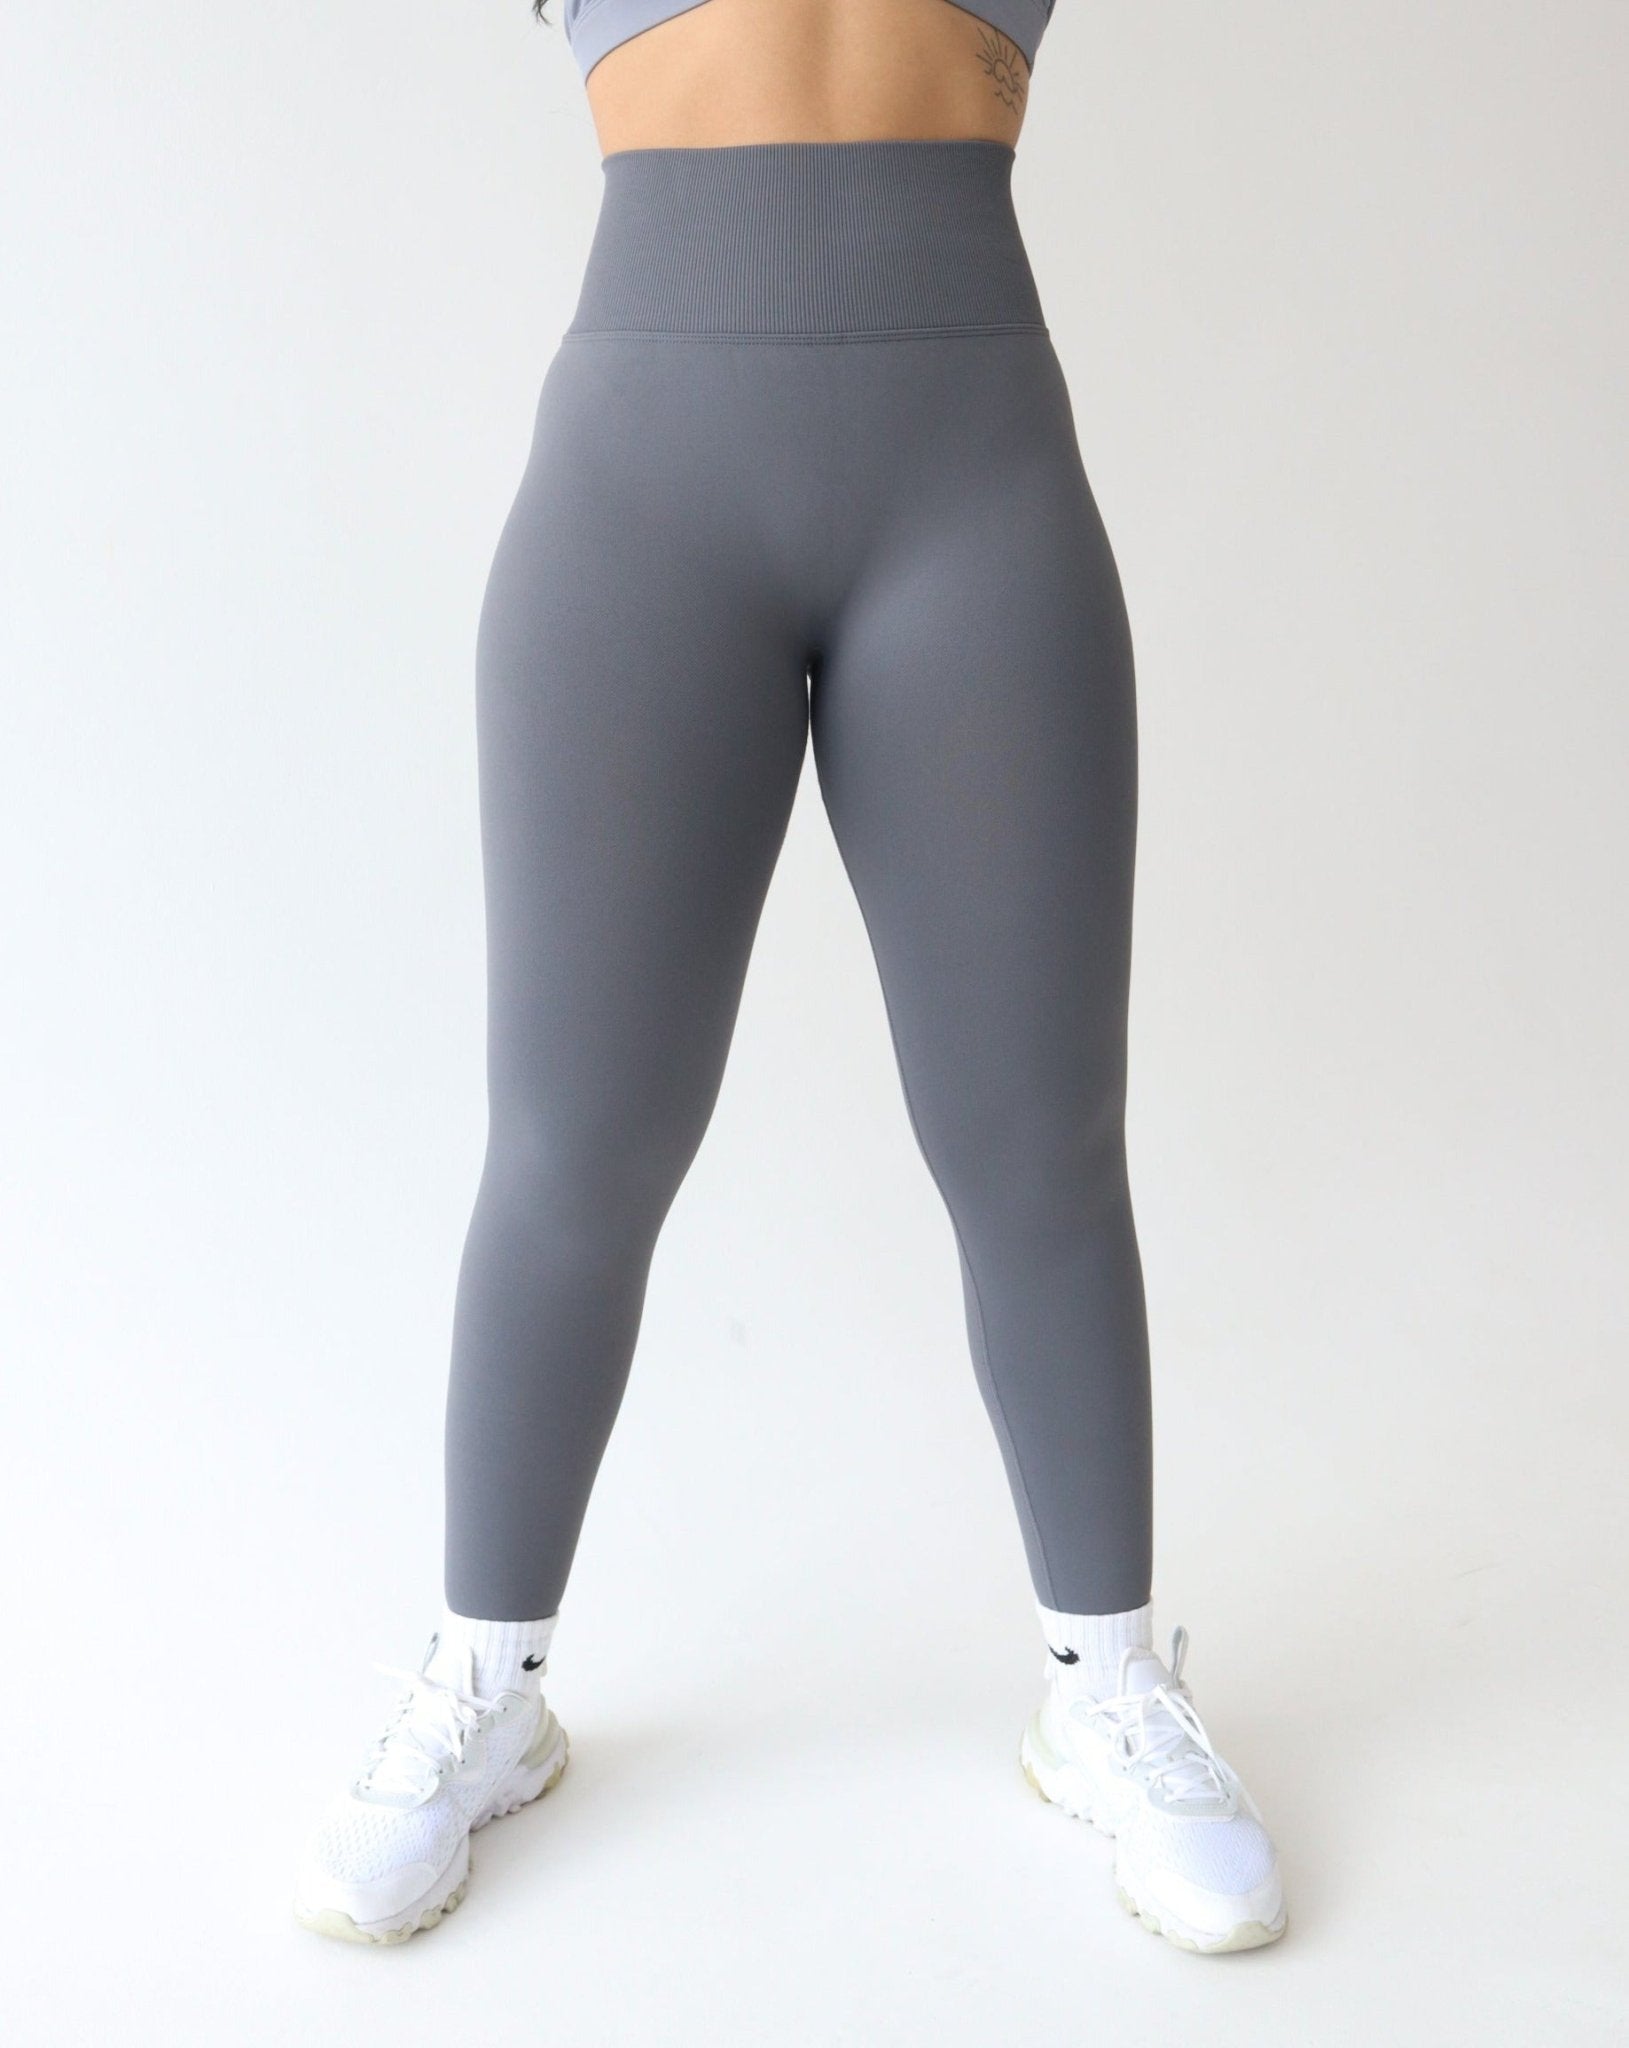 Gymshark leggings grey ladies womens stretch workout sports everyday basic  small